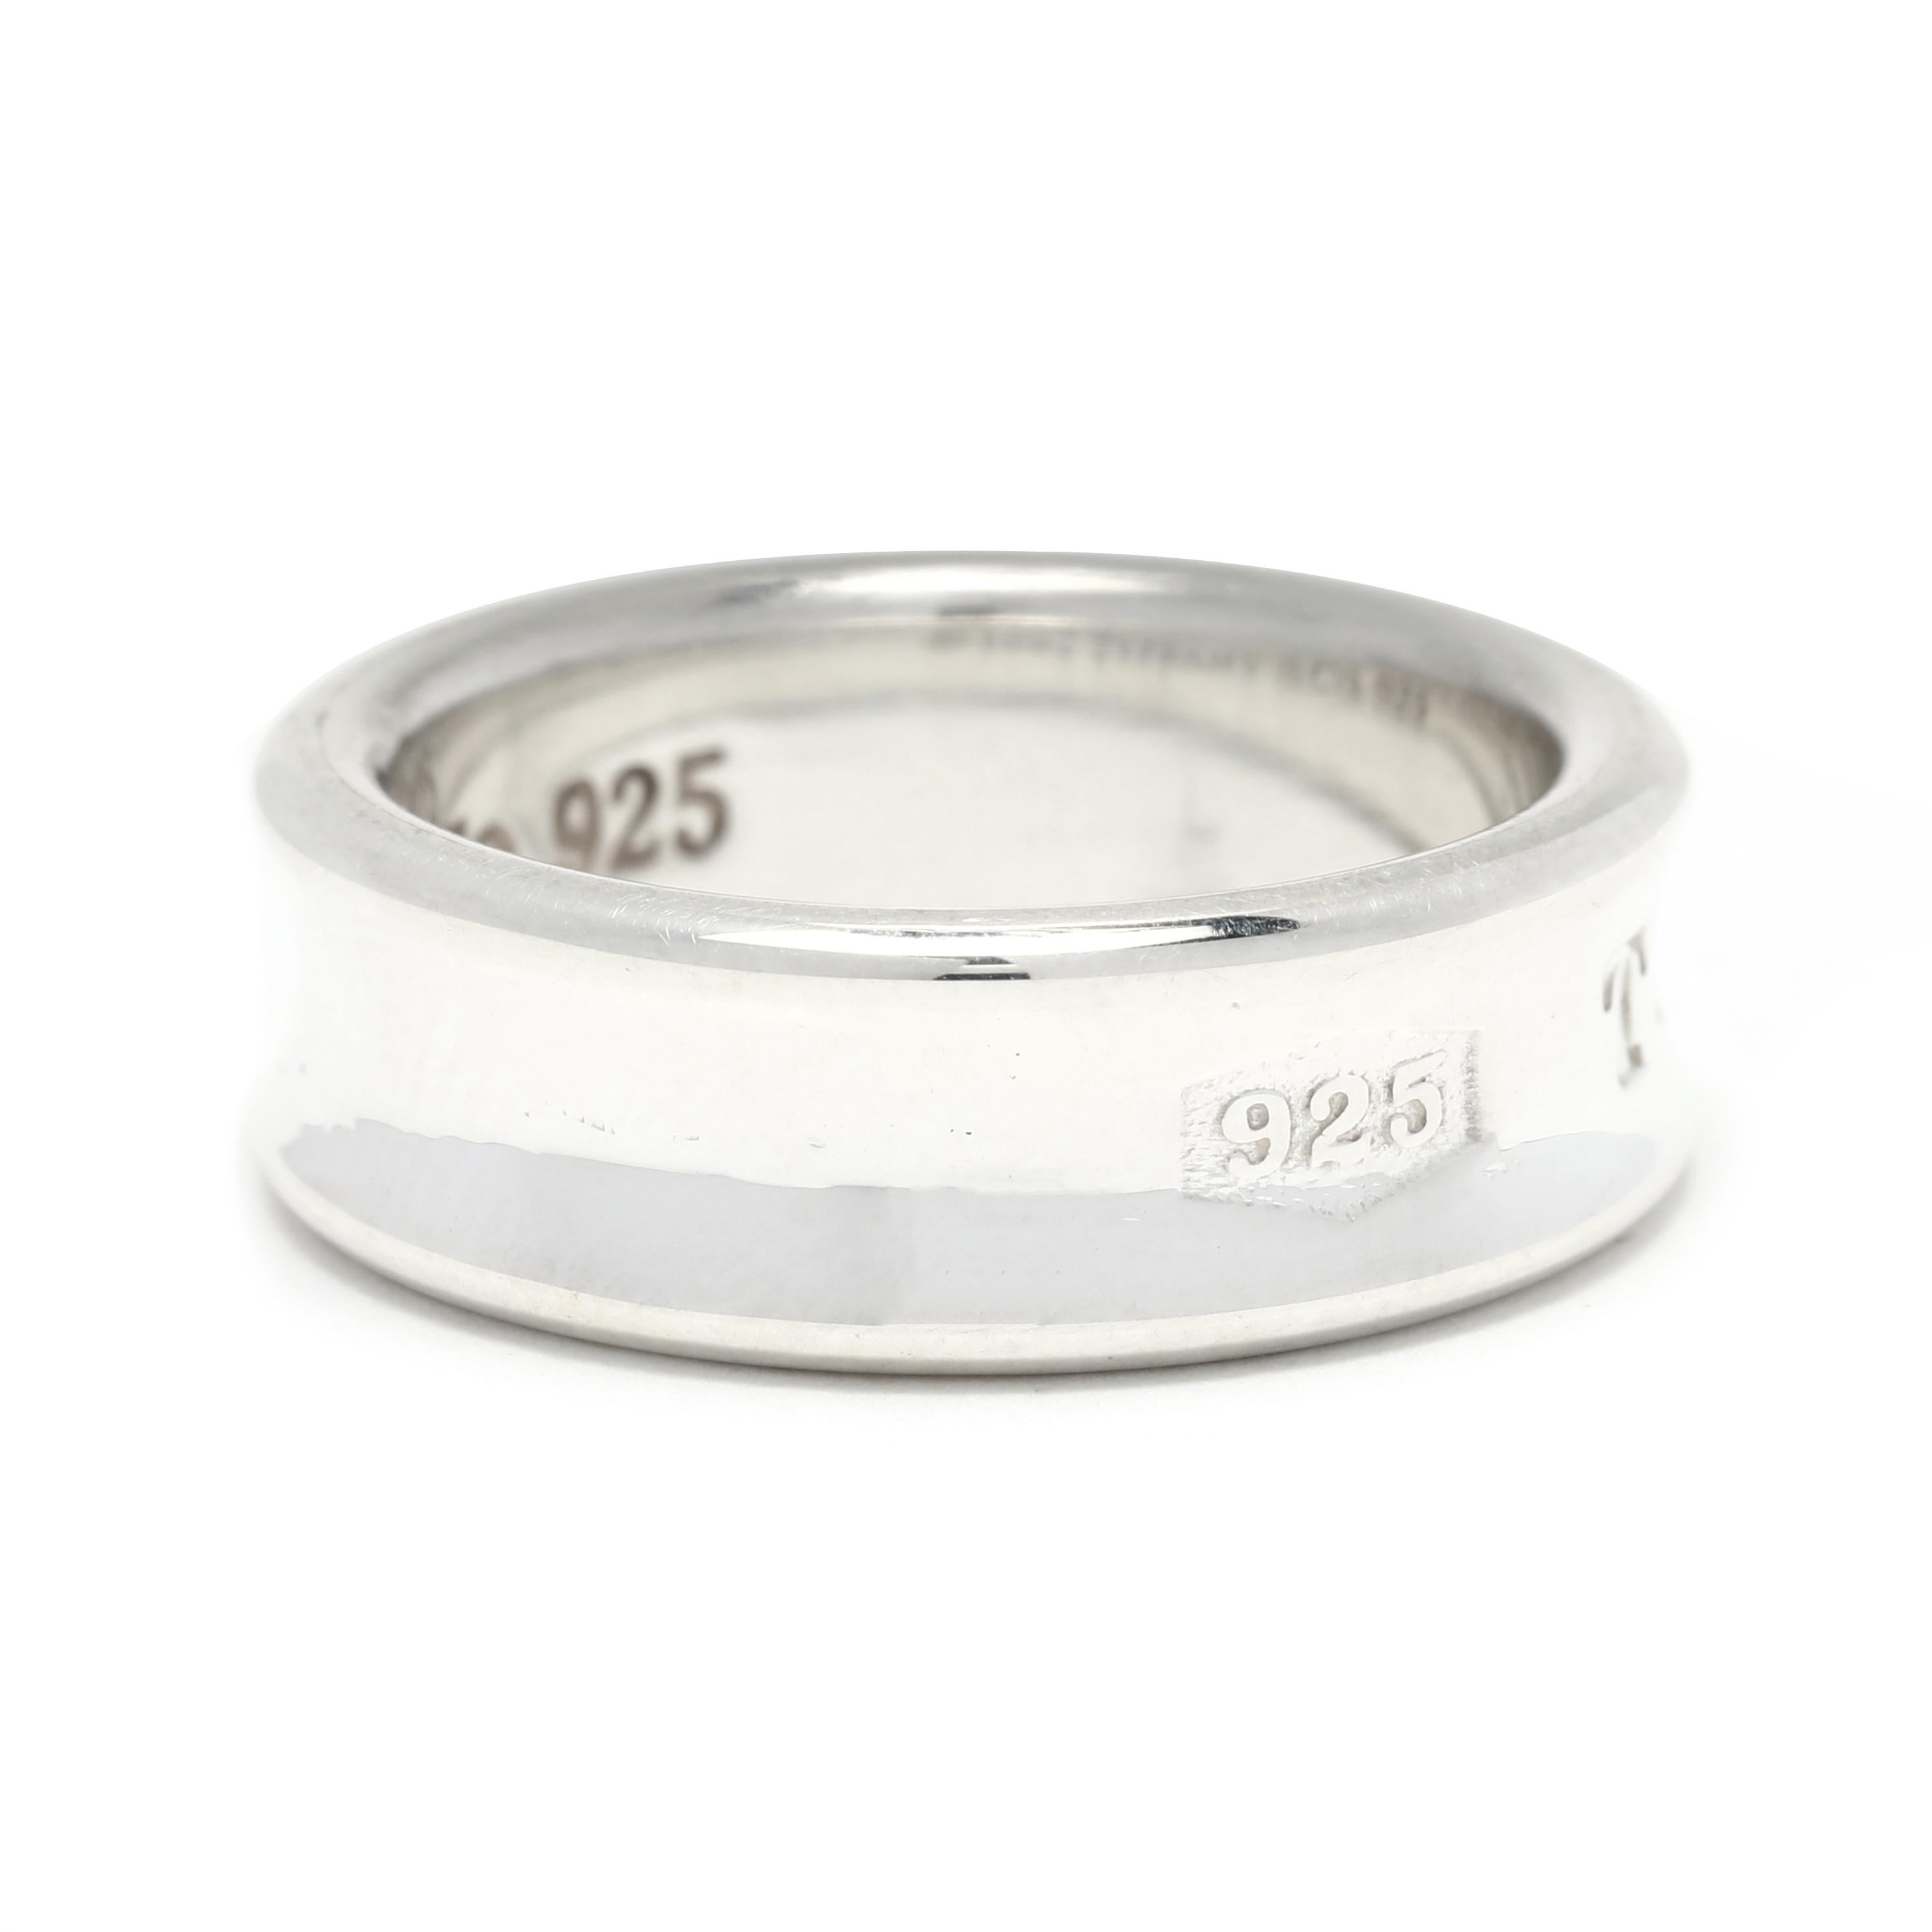 This gorgeous sterling silver Tiffany & Co. 1837 wide band ring is a timeless classic. Crafted in sterling silver with a sleek, polished finish, this ring features the iconic 1837 engraving, a tribute to the company's founding year. The wide band is